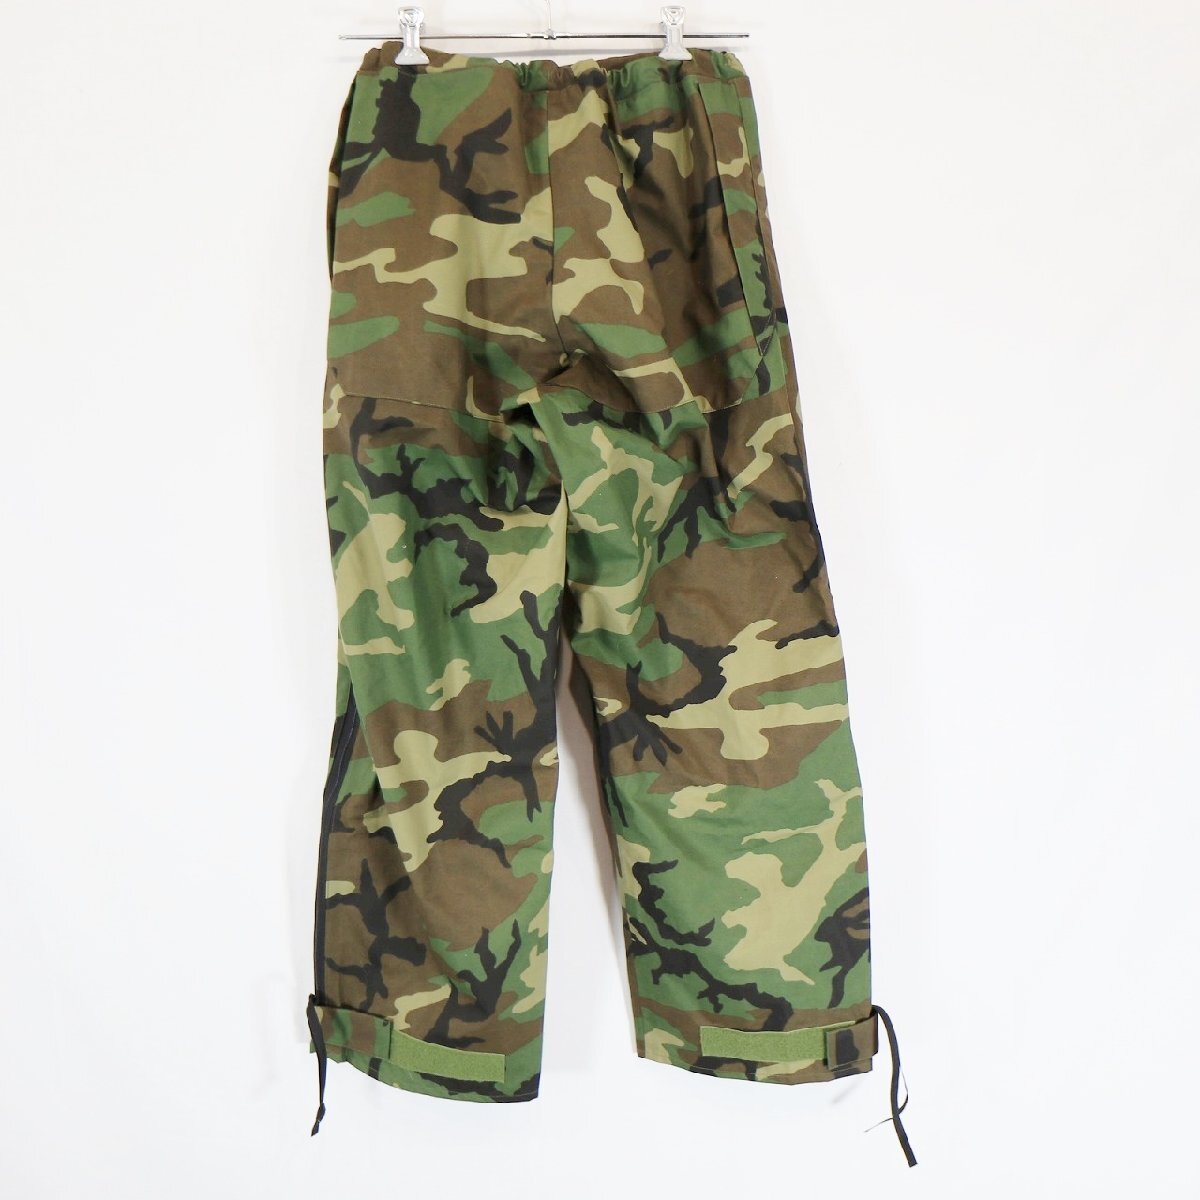 90s the US armed forces the truth thing US.ARMY GORE-TEX pants military land army America army camouflage pattern ( men's M ) N1093 1 jpy start 